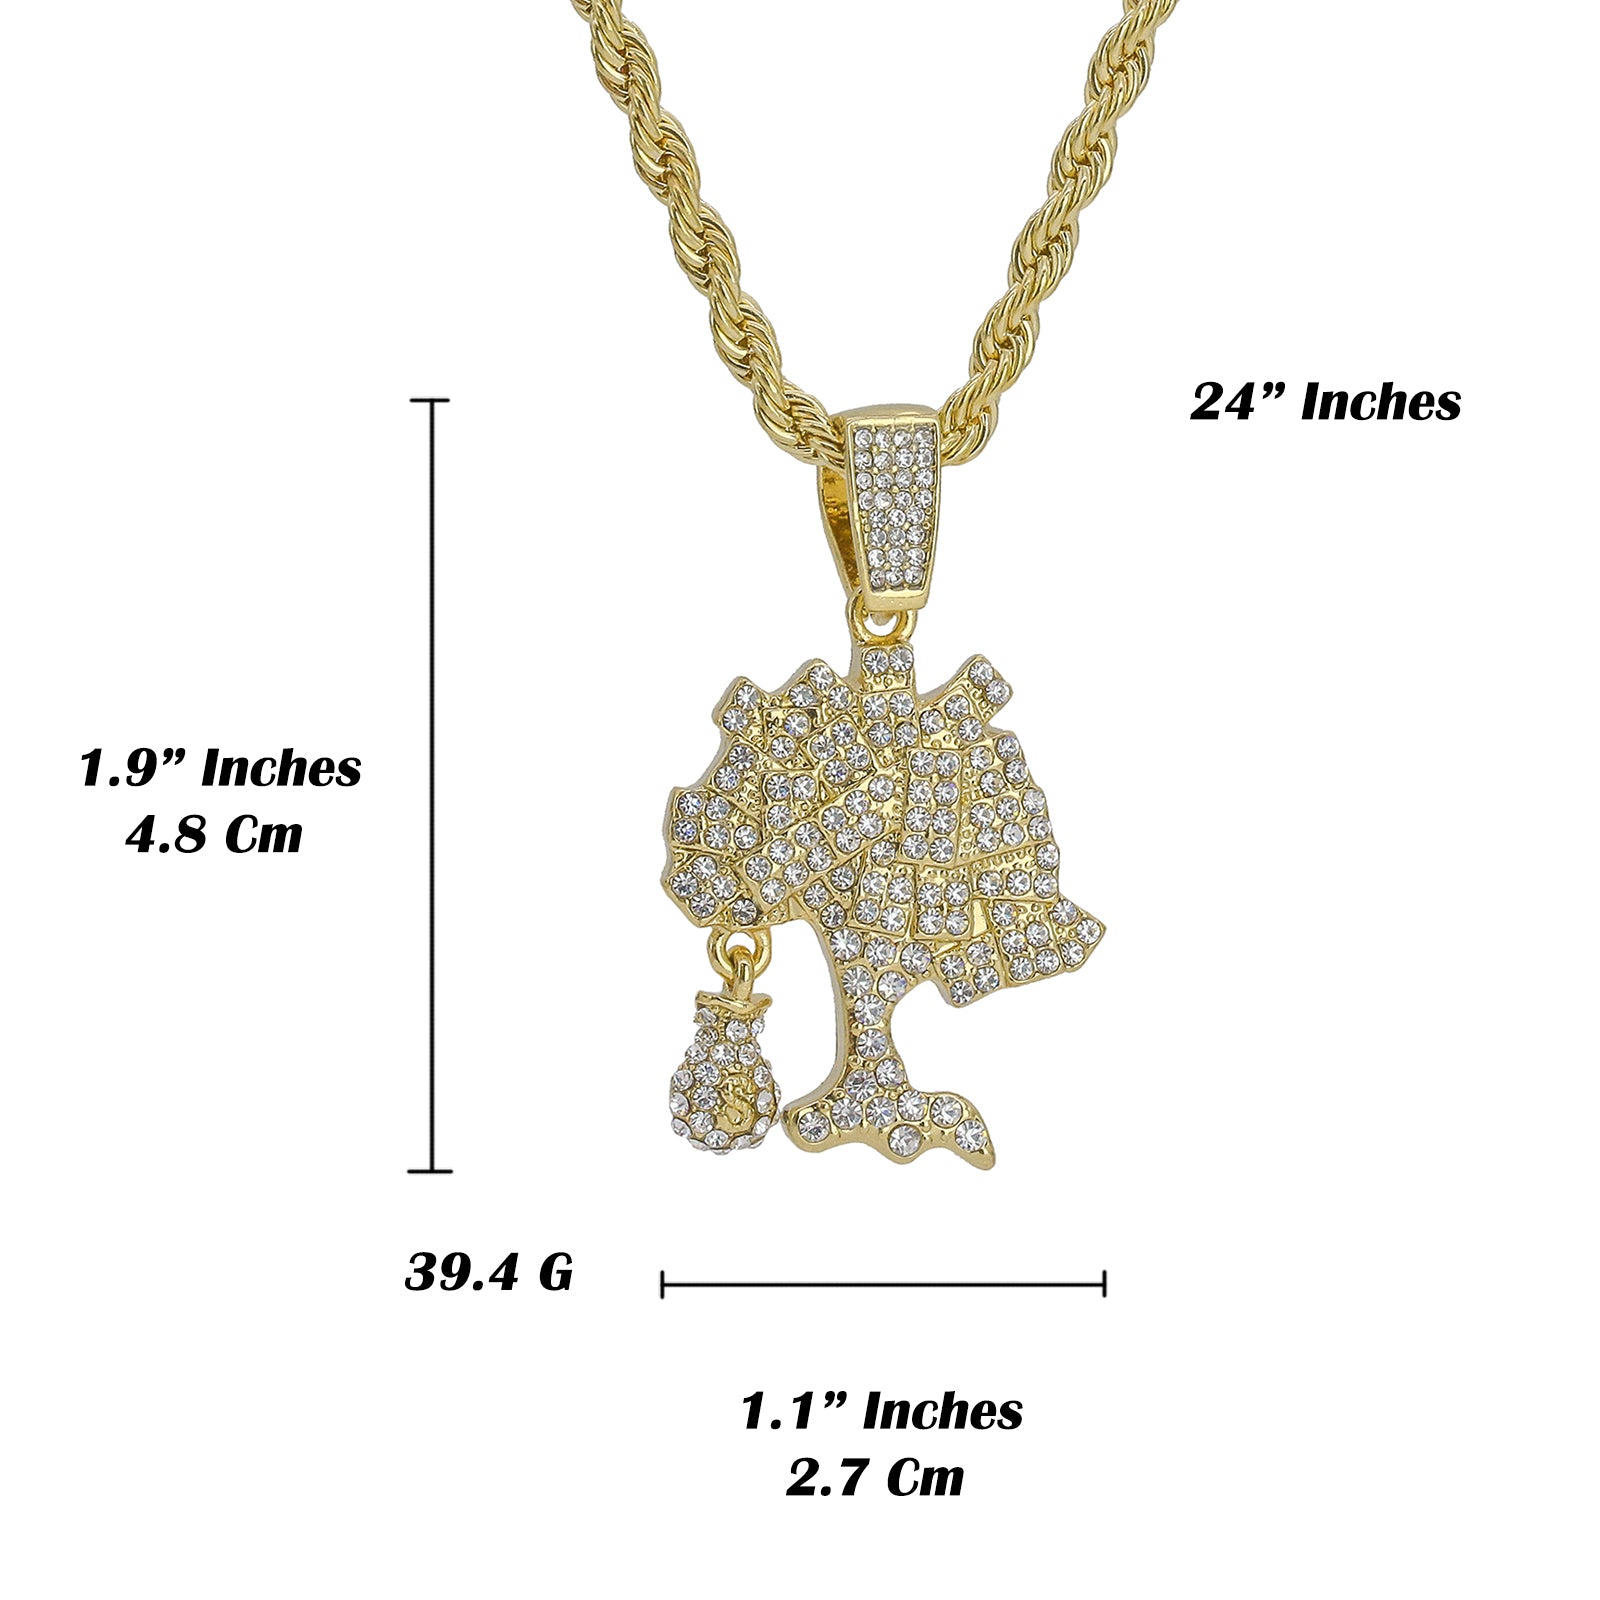 Cz Money Tree Pendant 24" Rope Chain Men's 18k Gold Plated Jewelry